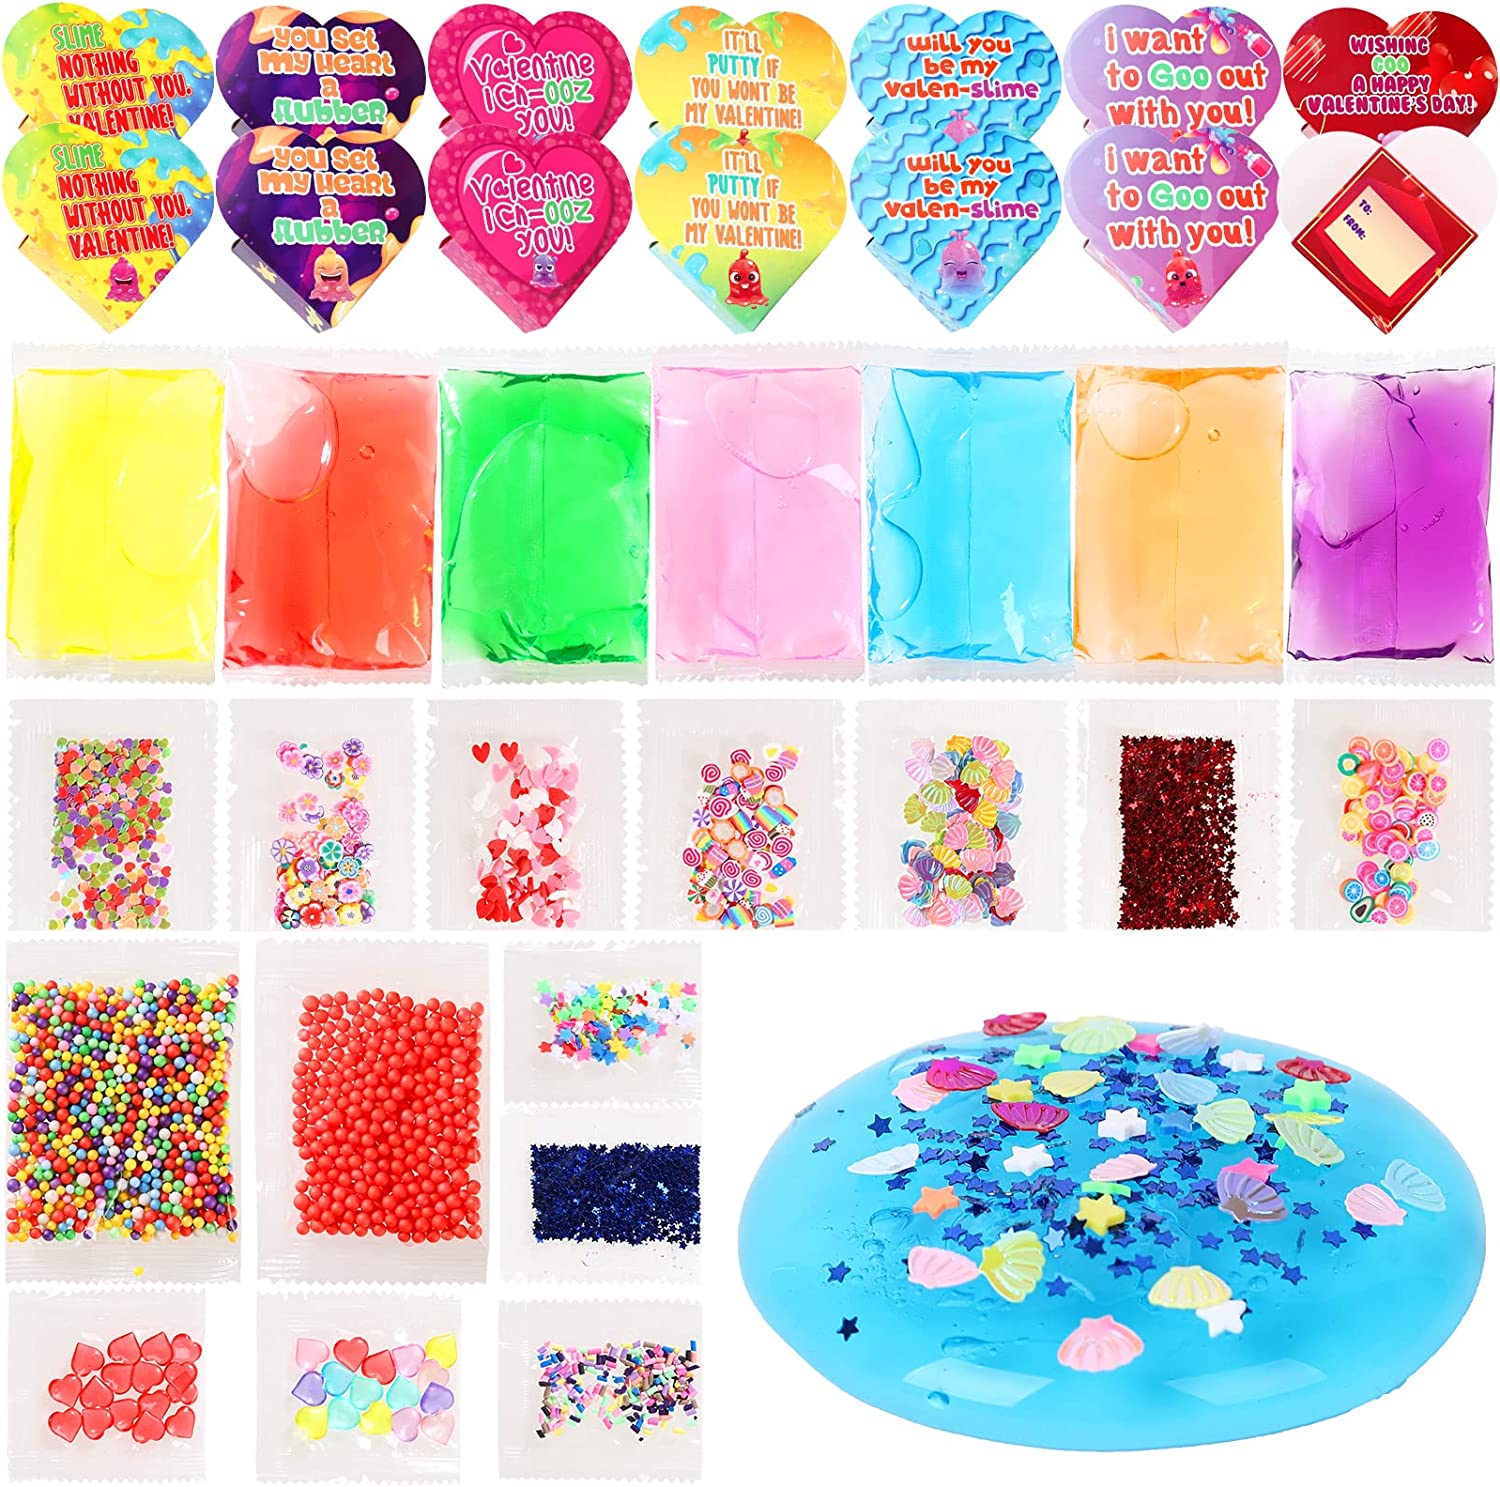 28 Packs Valentine's Day DIY Slime Kit with Heart Boxes, Slime with Glitter  Combo Valentine Gift Stress Relief Toys for Valentine Party Favor, Gift  Exchange, Valentines Greeting Cards 